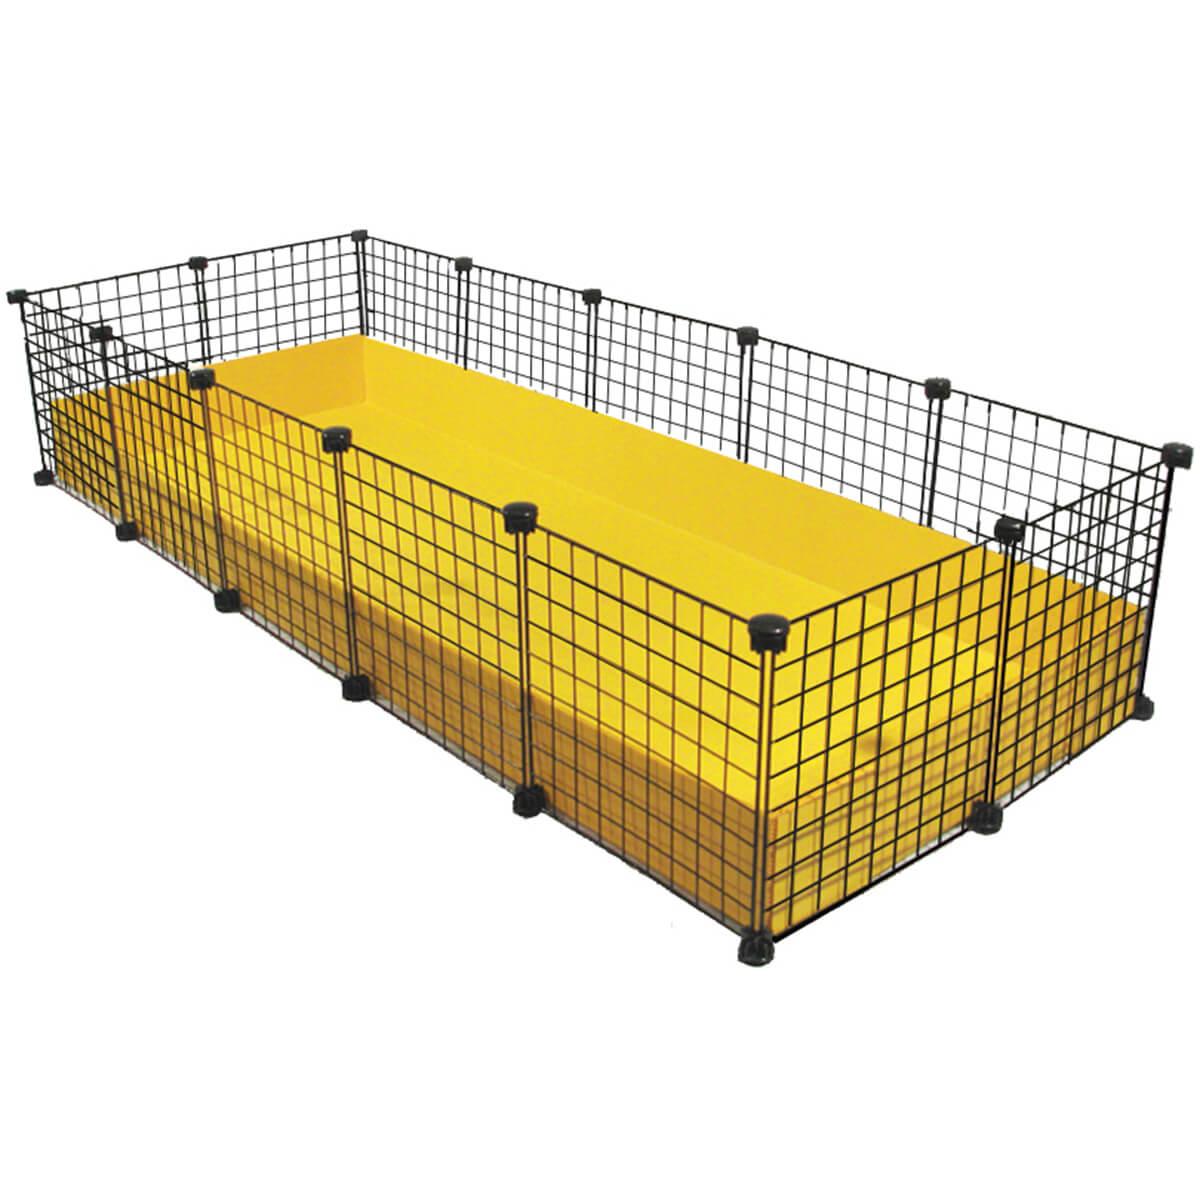 XL (2x5 Grids) Cage - Standard Cages - Cagetopia